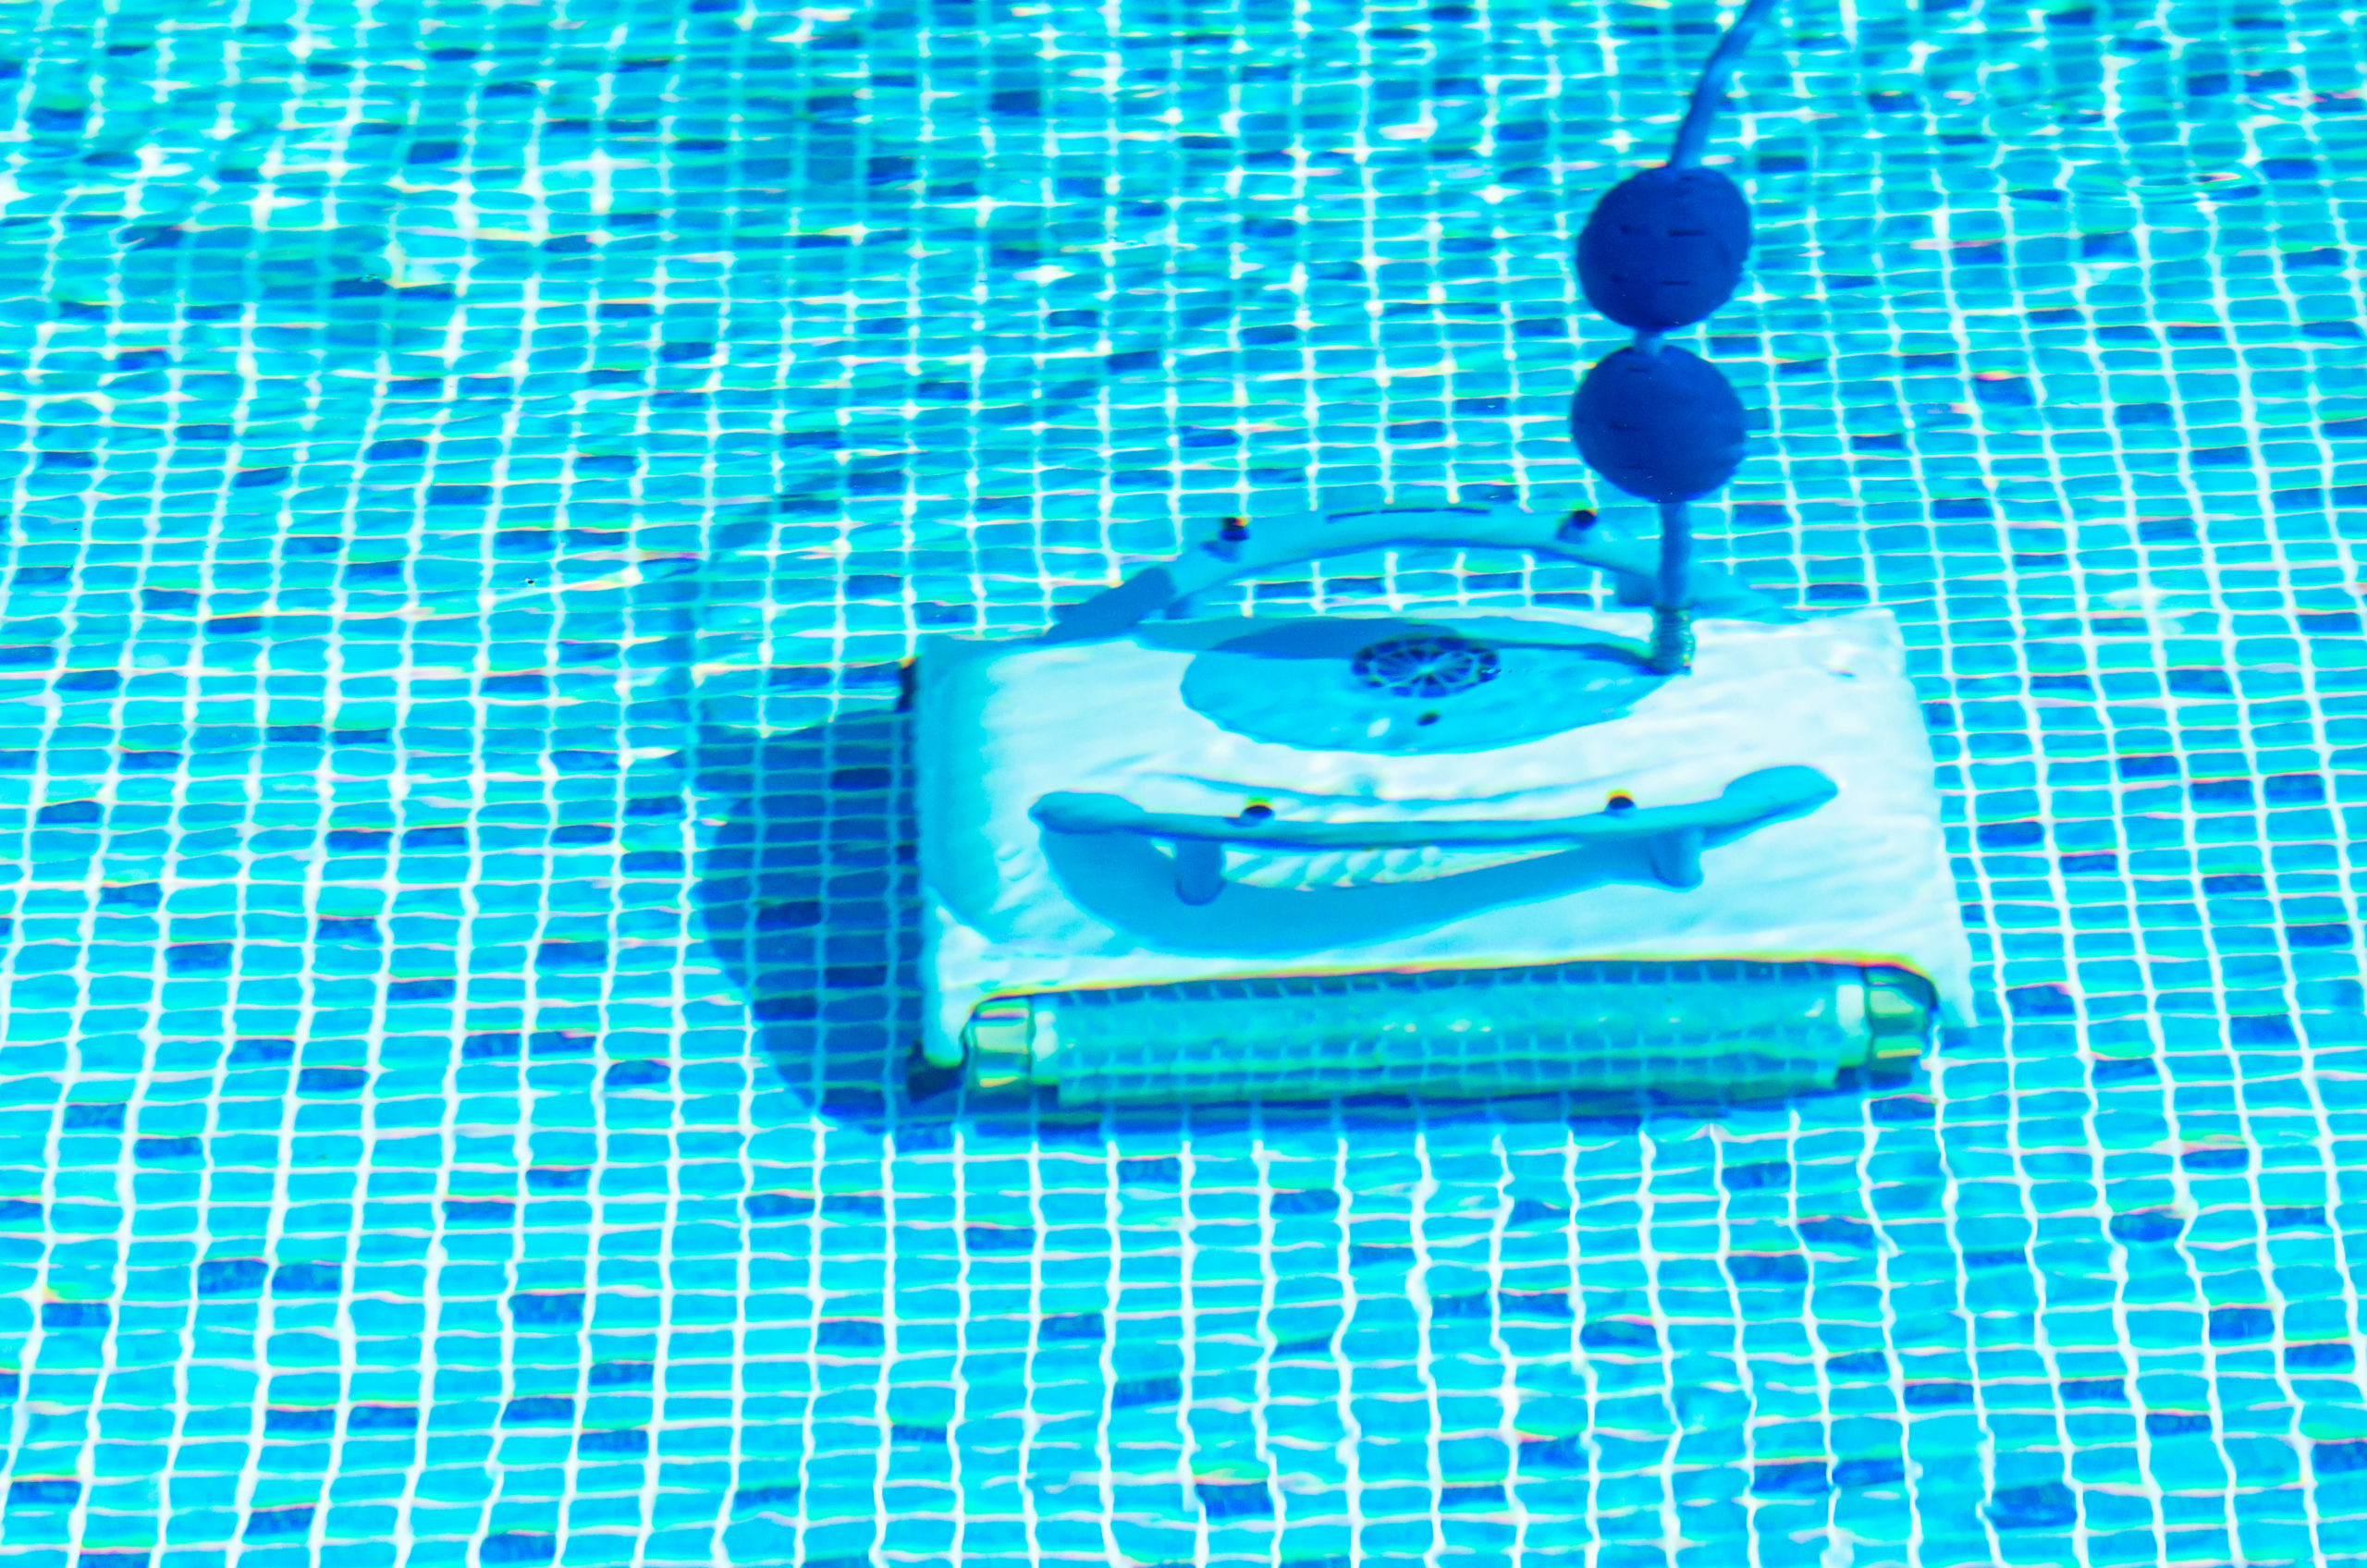 An automatic pool vacuum, a device designed to autonomously clean the pool's surface and bottom